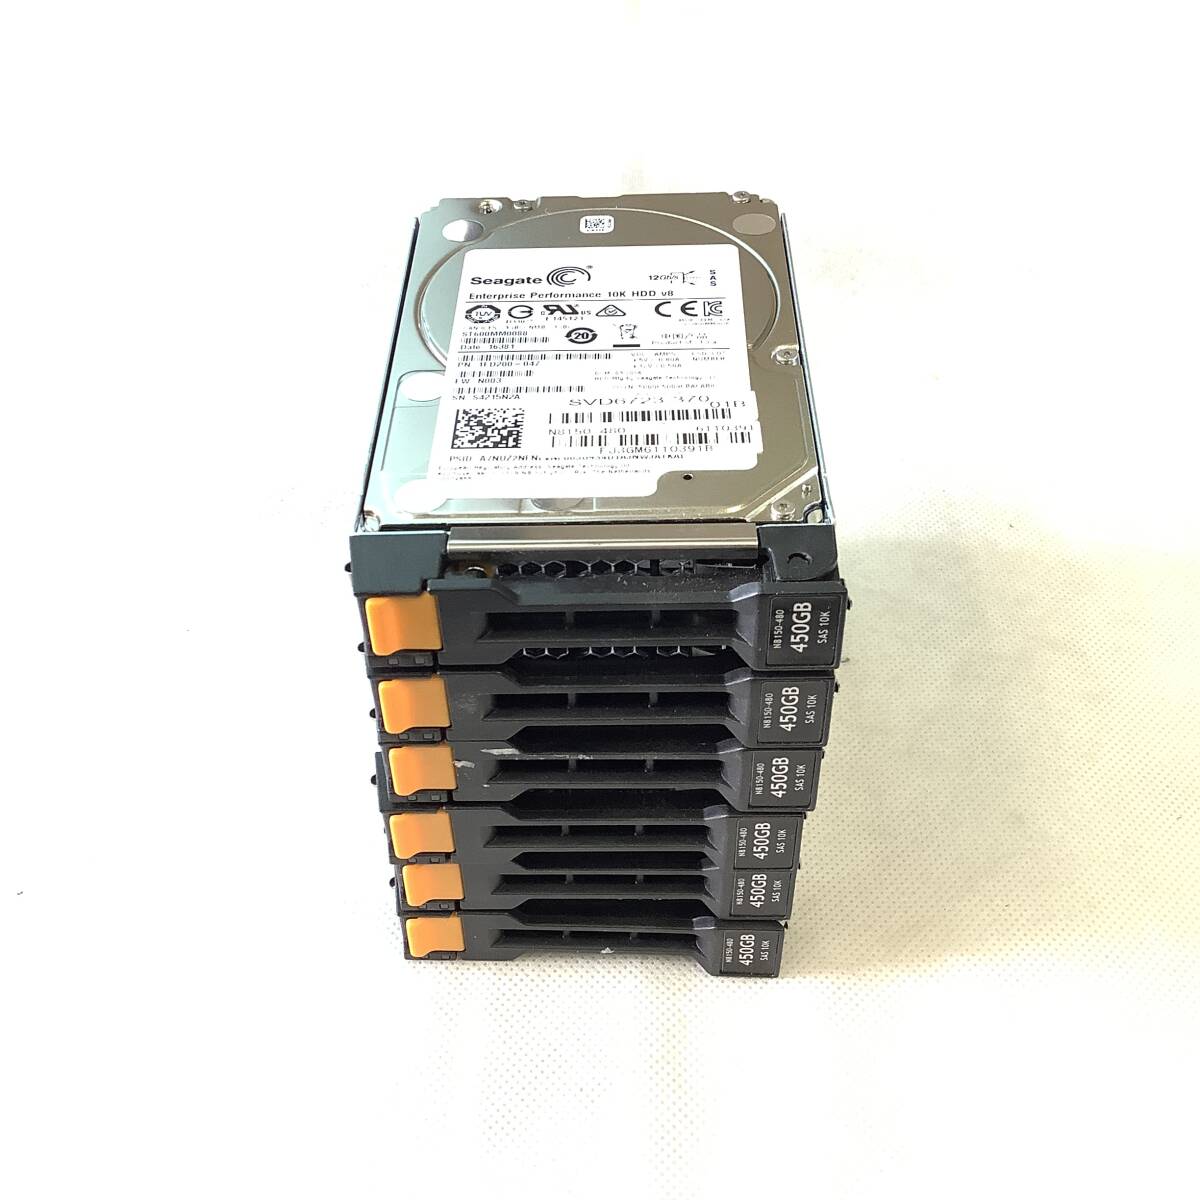 K6042669 Seagate 600GB SAS 10K 2.5 -inch NEC mounter HDD 6 point [ used operation goods ]